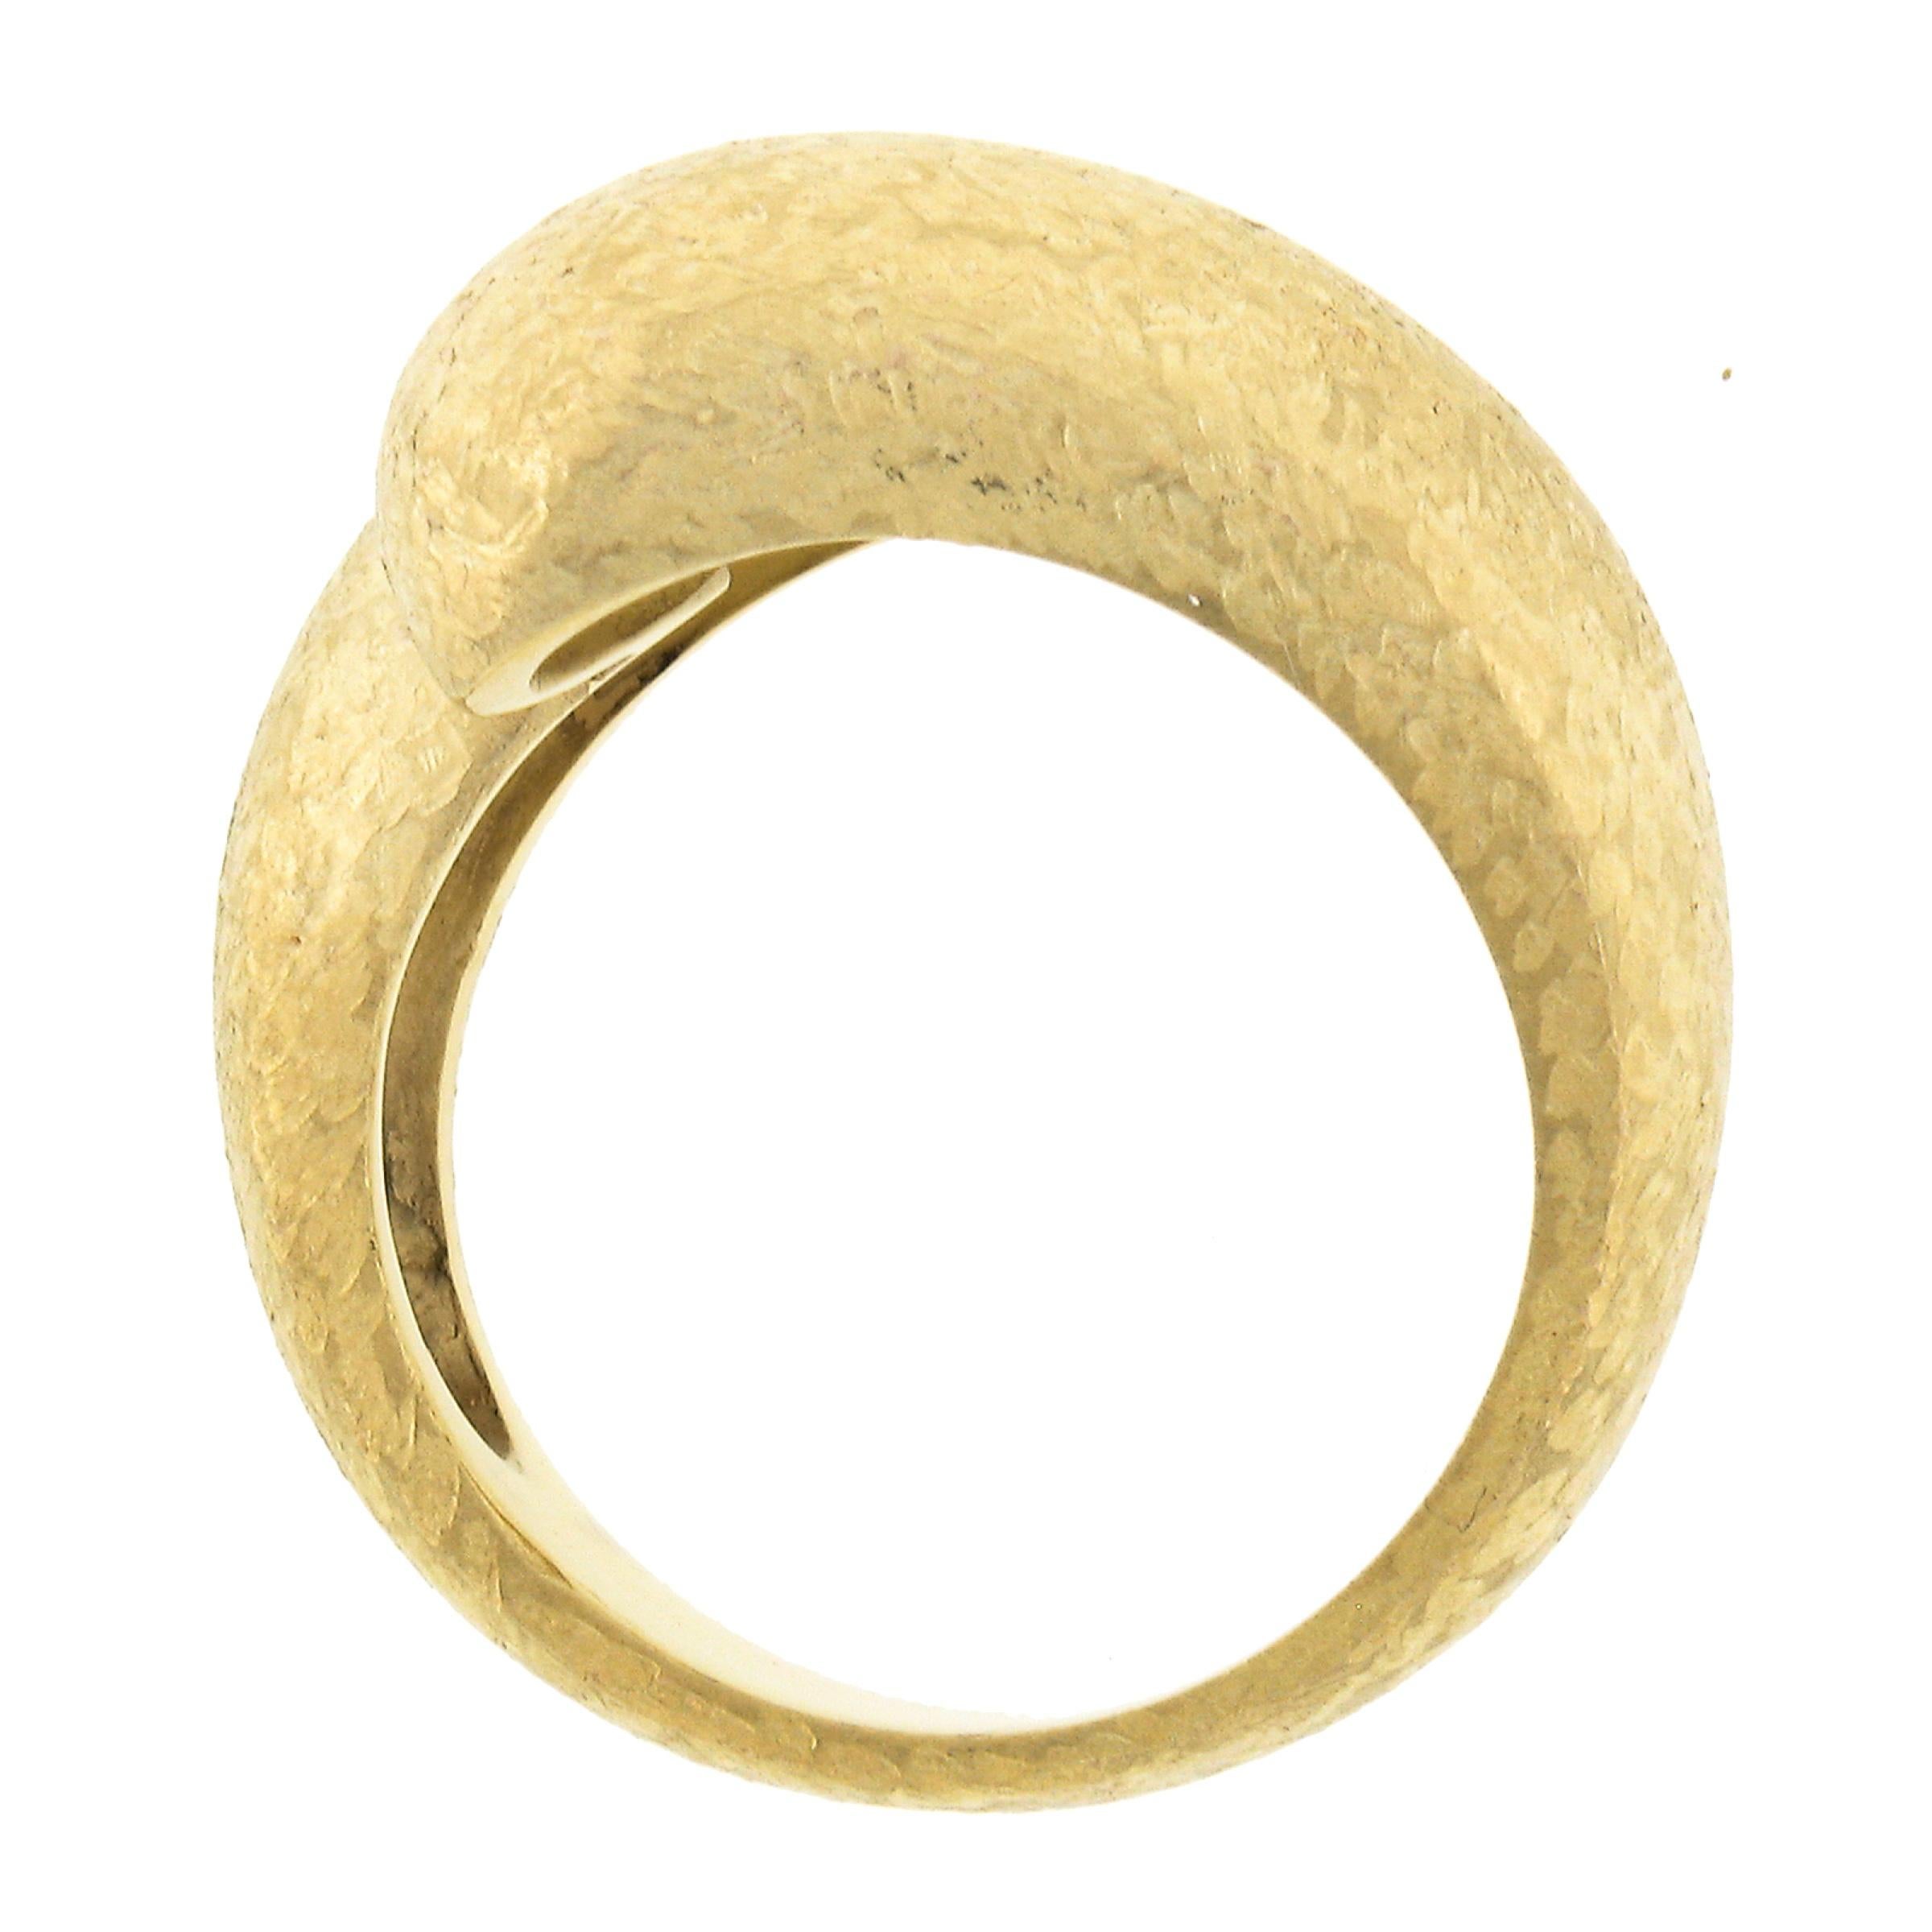 Designer Maz Solid 14K Yellow Gold Unique Textured Work Wide Snake Bypass Ring For Sale 2